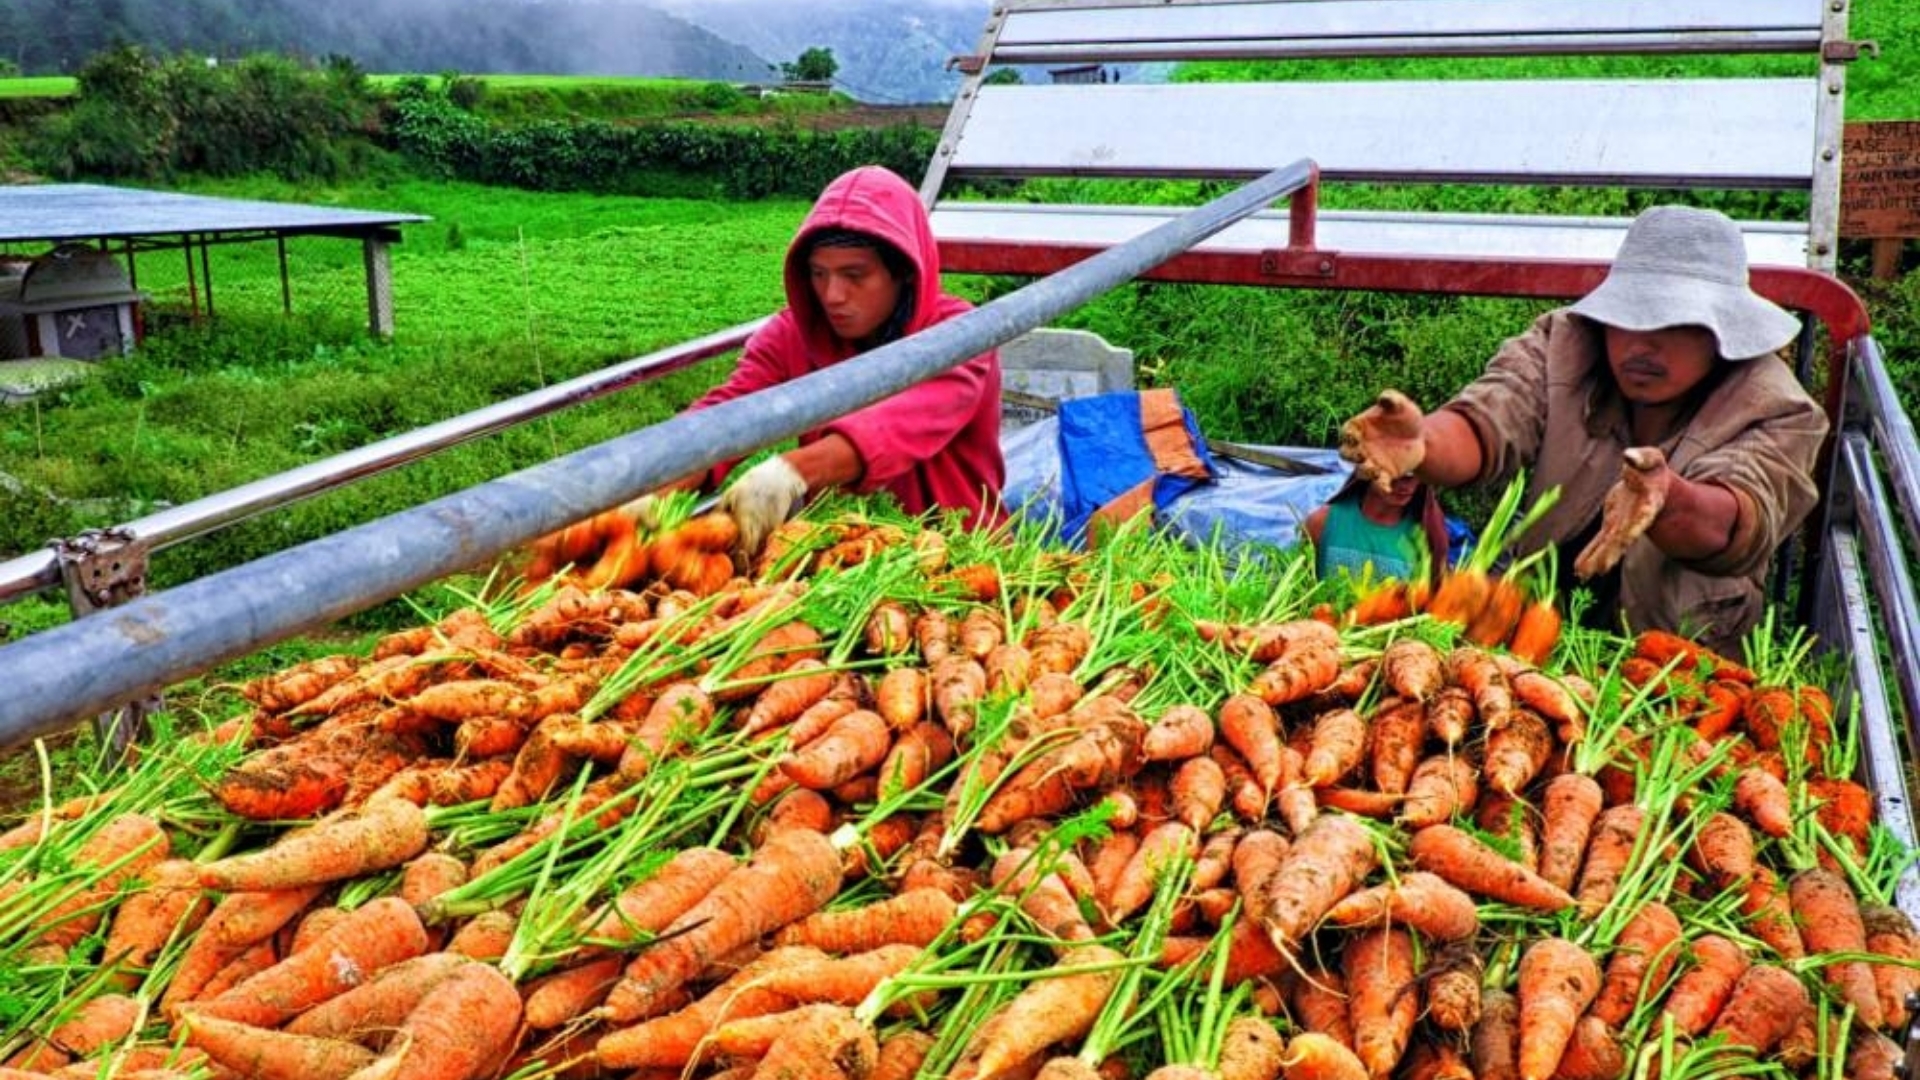 Carrot abundance in Benguet attributed to smuggling